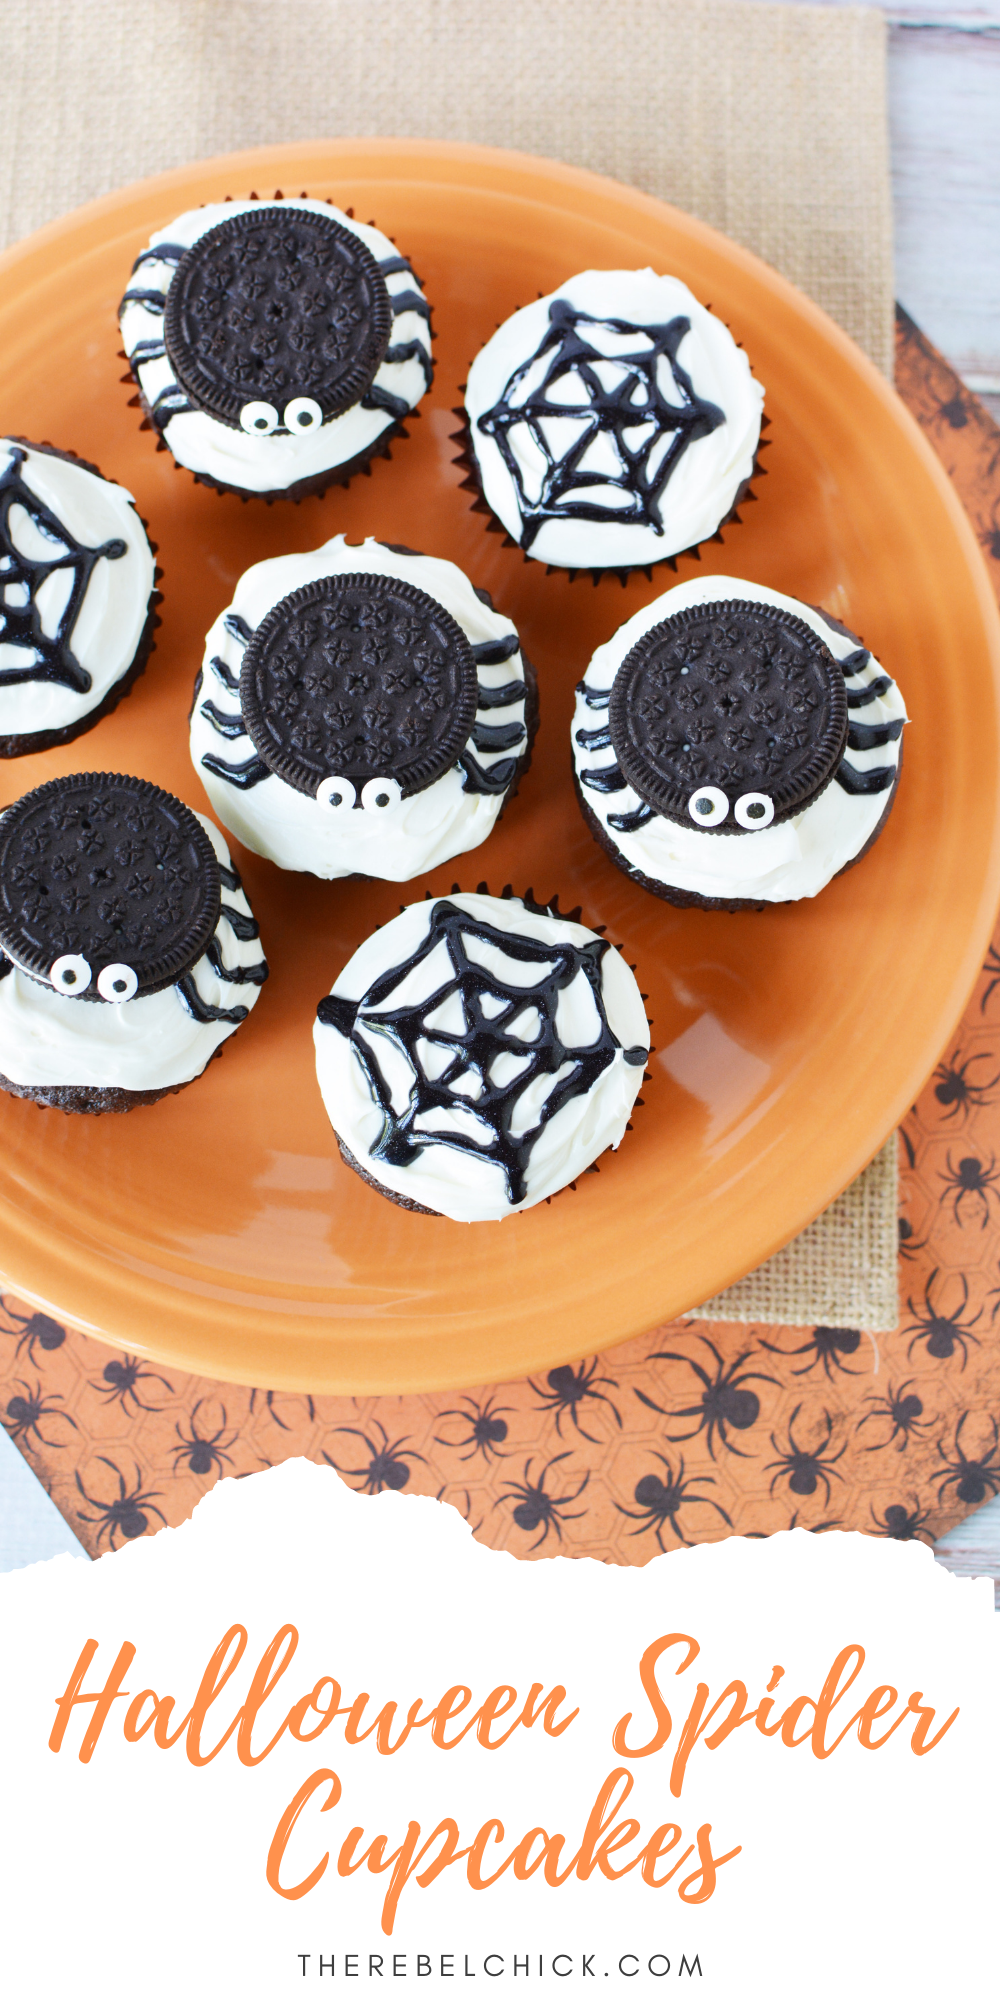 How to Make this Halloween Spider Cupcakes Recipe